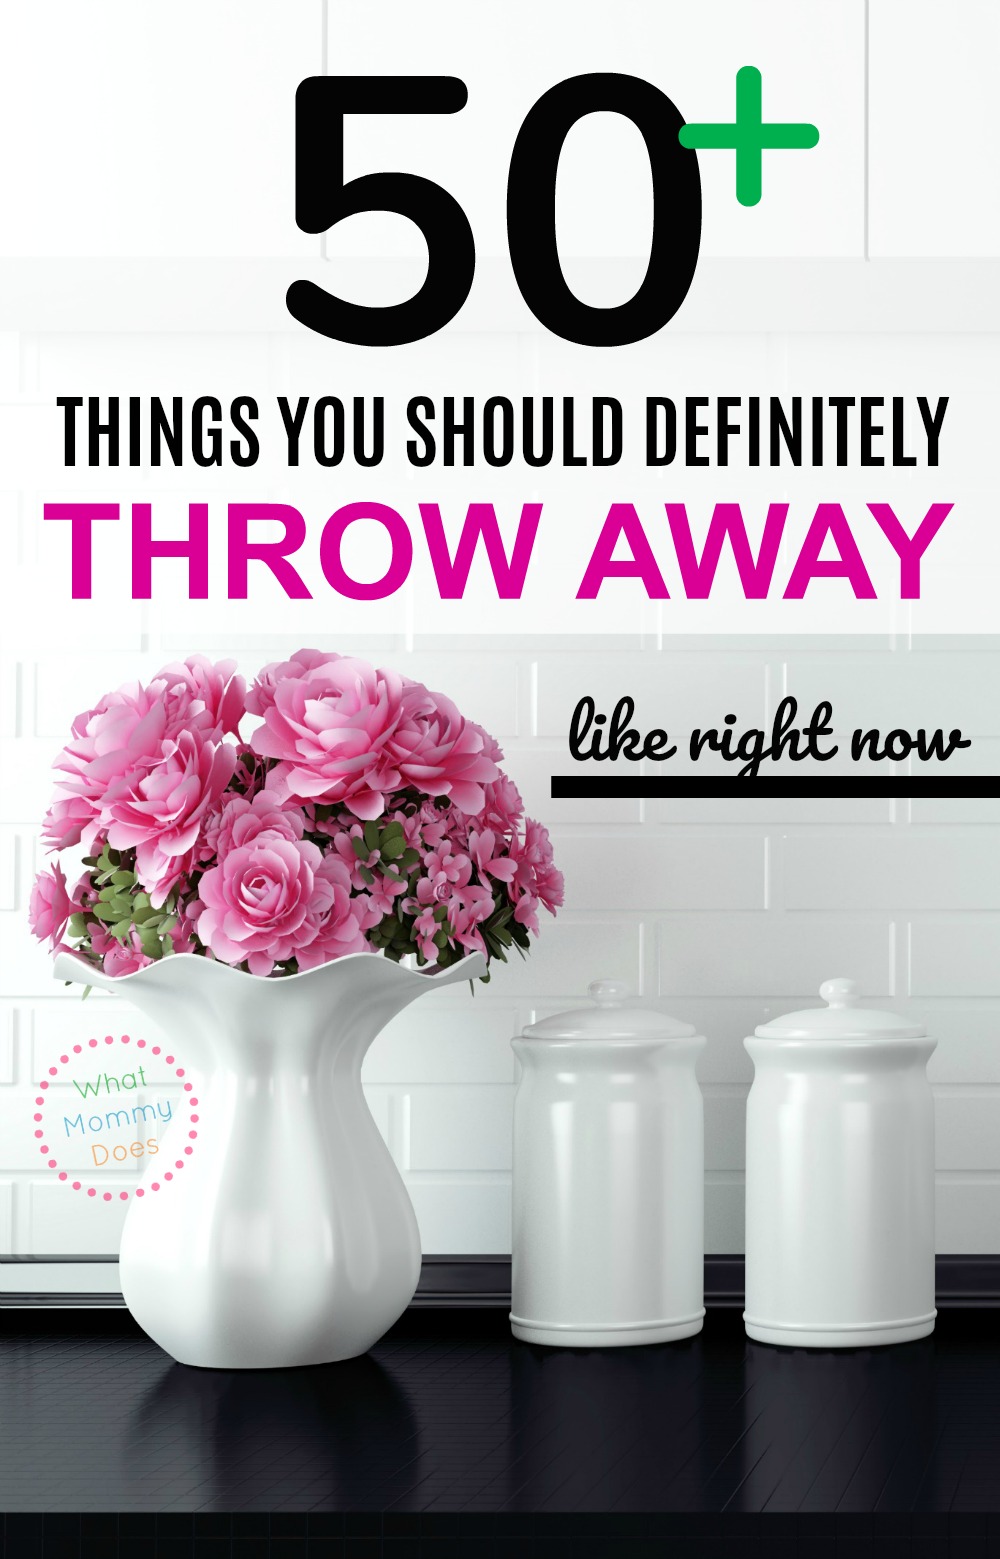 If you're feeling overwhelmed by clutter, you'll feel SO MUCH BETTER if you purge these items from your home! It was so much easier to get started organizing when I had less stuff to worry about. Just do it without thinking & you'll feel better! | list of things to throw away | decluttering checklist | conquer clutter | organized home ideas | plan to reduce & simplify